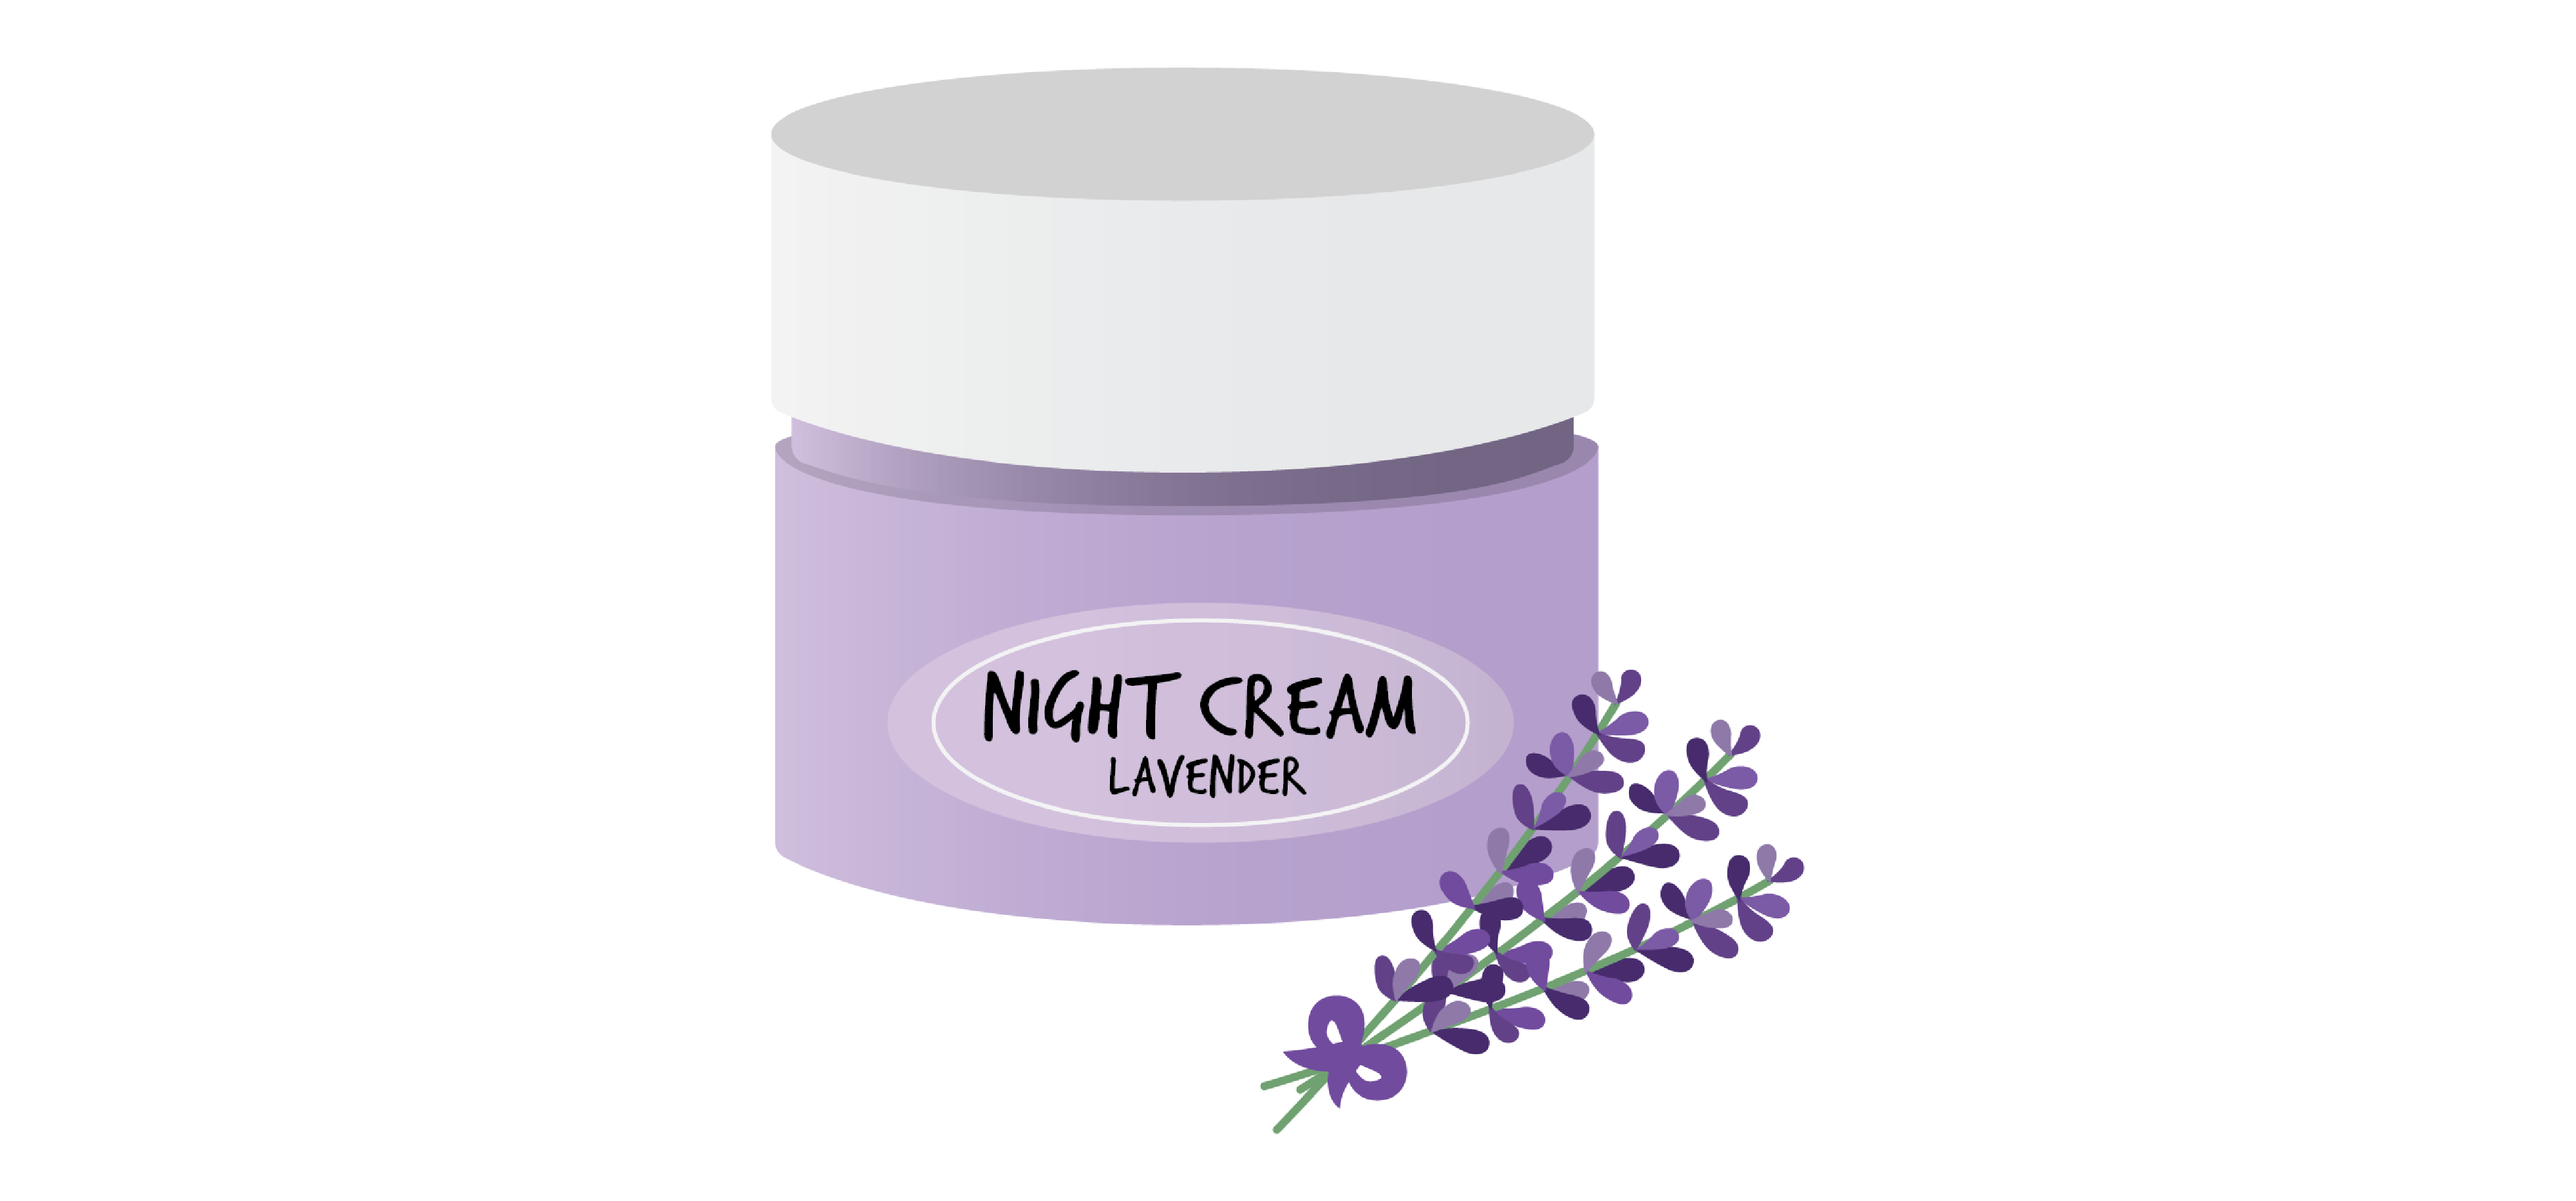 Small purple container with white lid and Night Cream, Lavender written on a sticker on the front. In front of the container are three lavender branches.